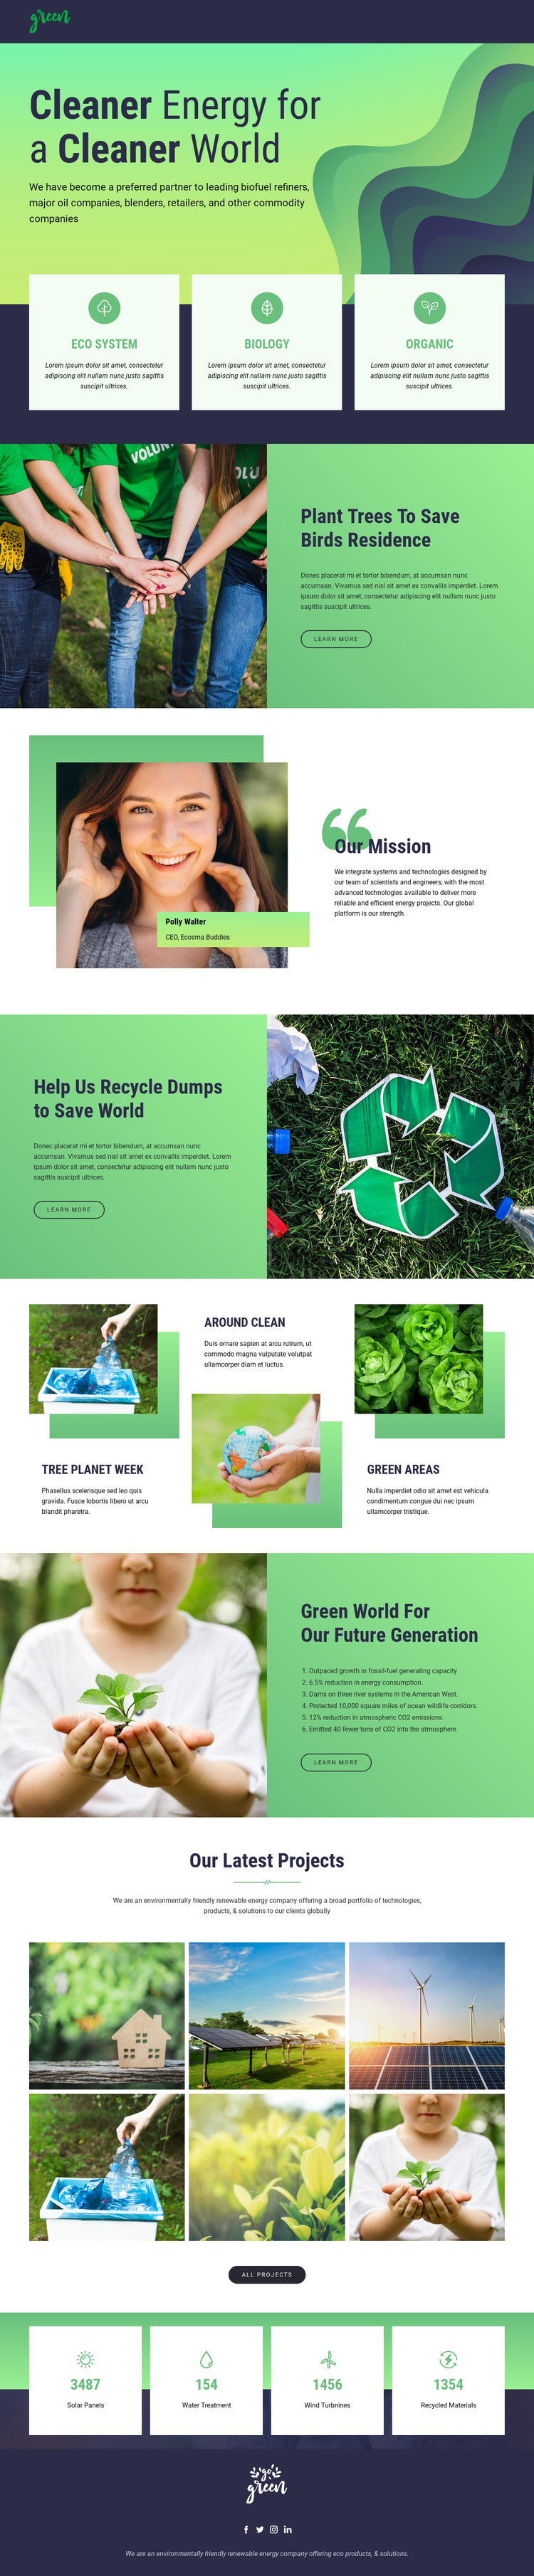 Clean energy to save nature Homepage Design